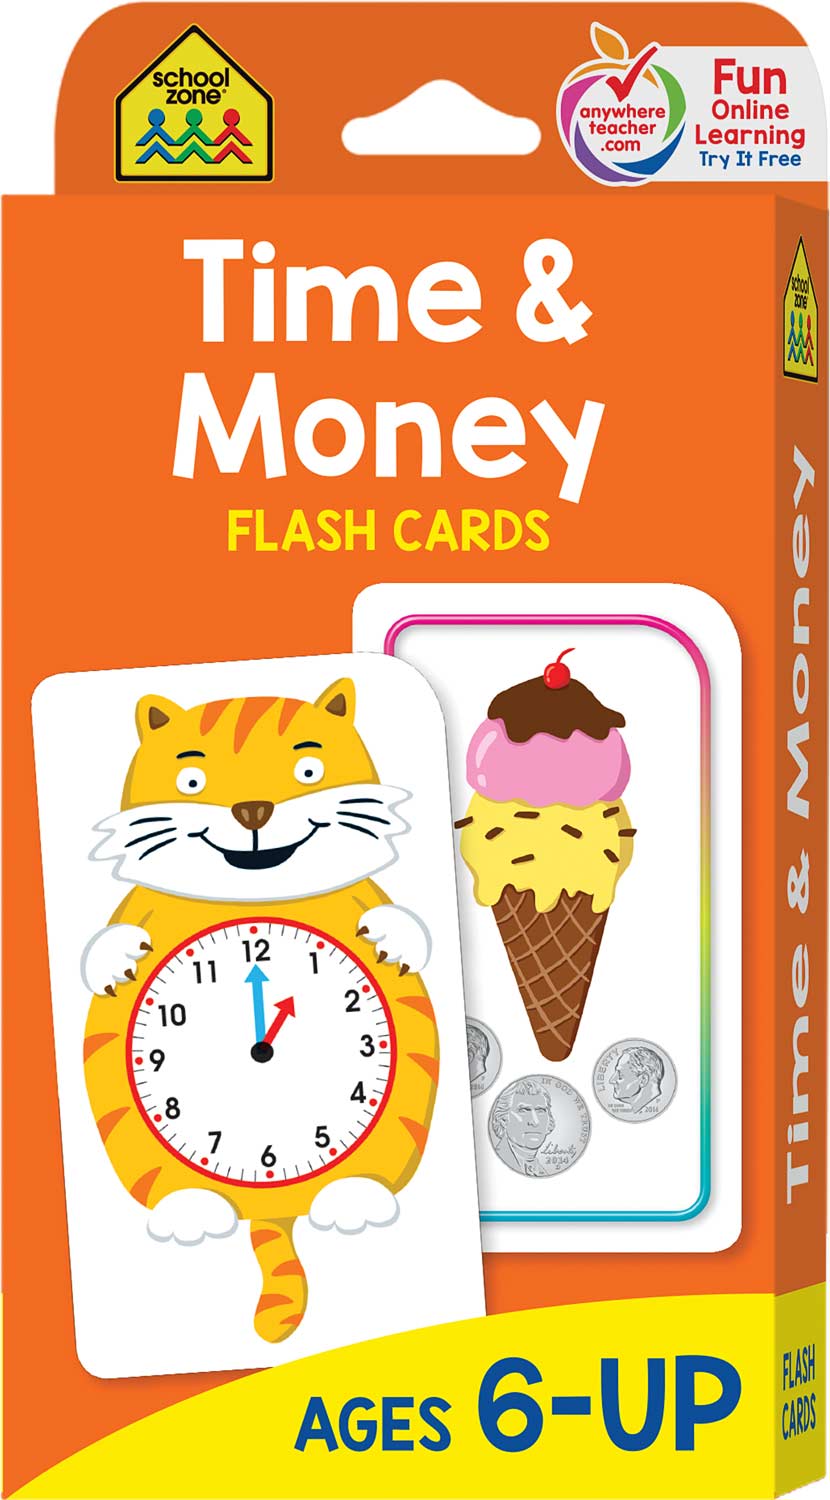 1st-2nd-and-3rd-grade-time-and-money-flash-cards-raff-and-friends